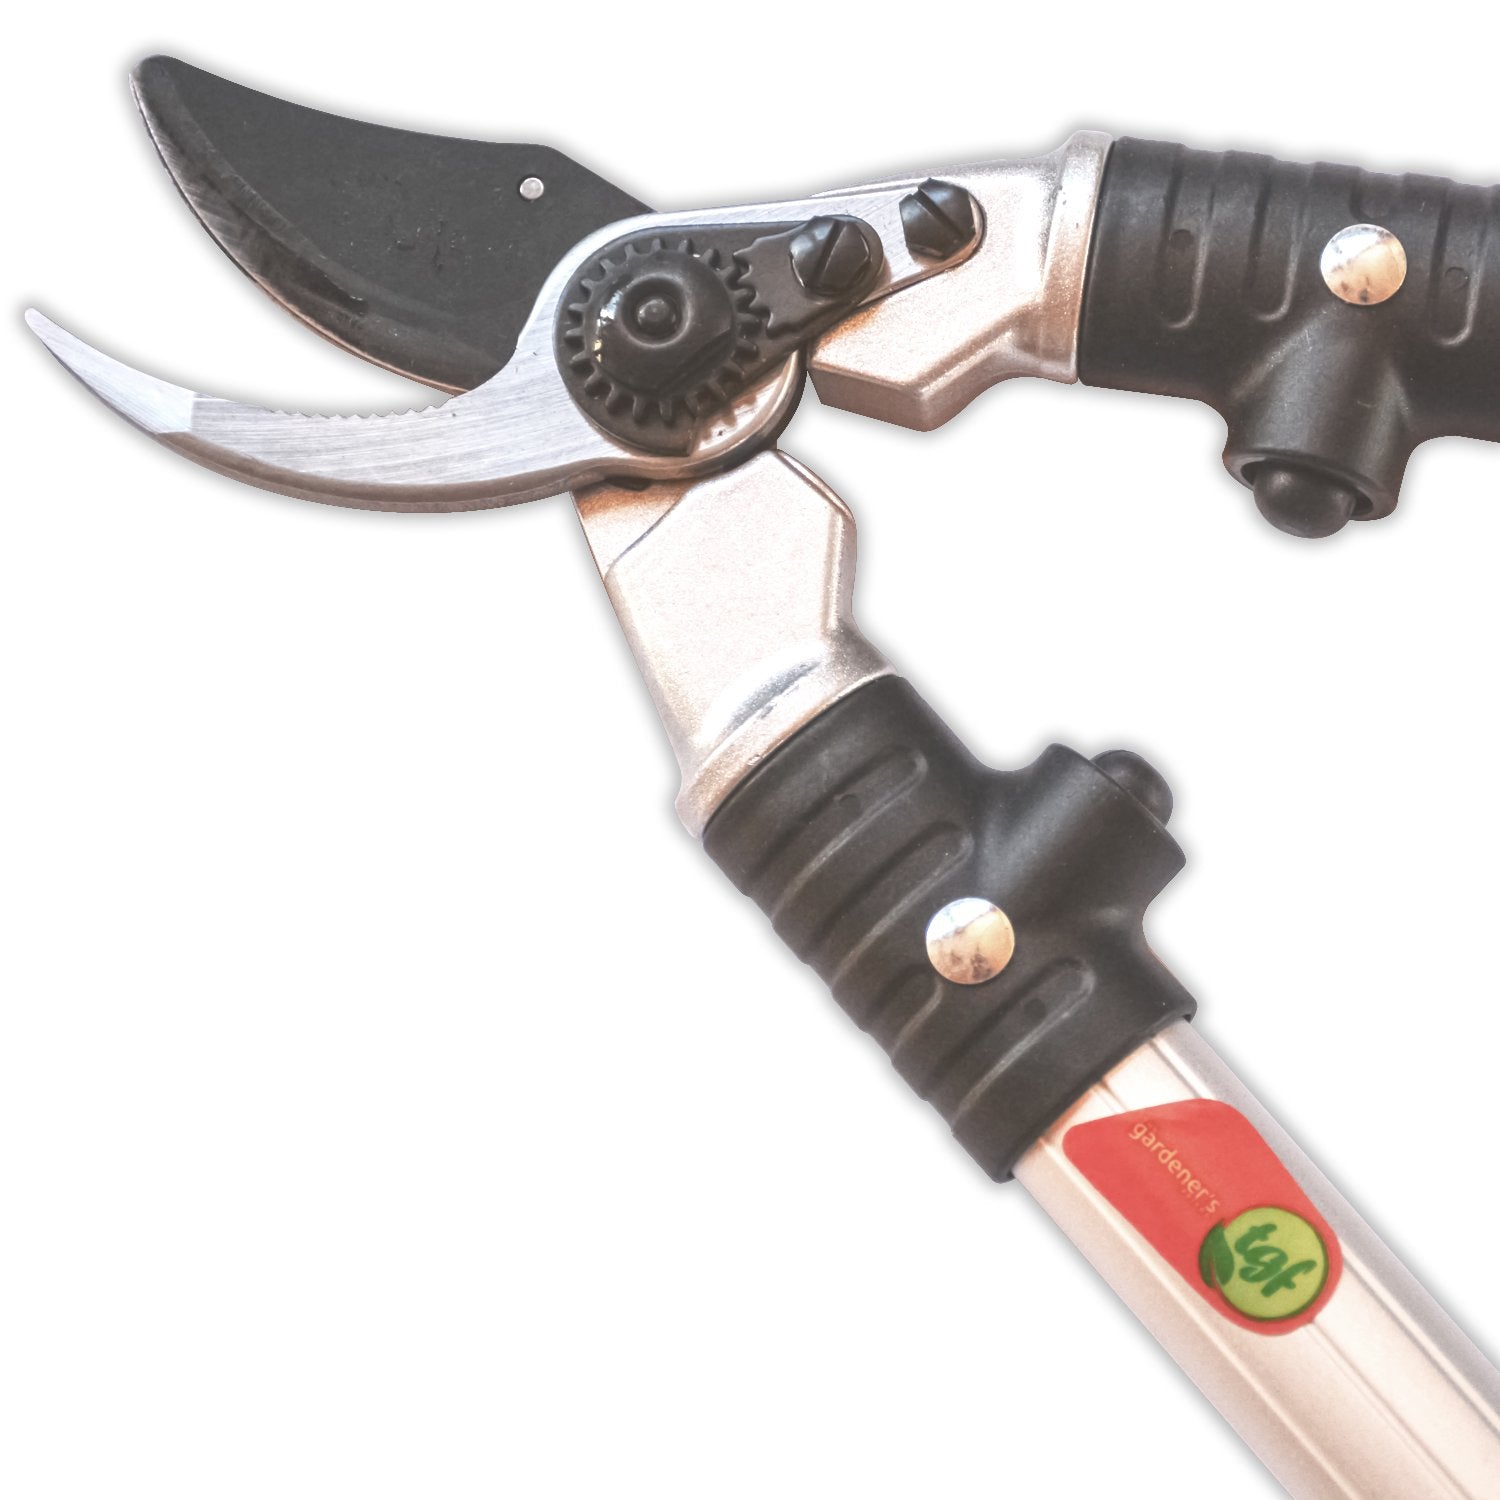 Ratchet pruning shears with assisted action and heavy-duty, nonstick steel blade by The Gardener's Friend.